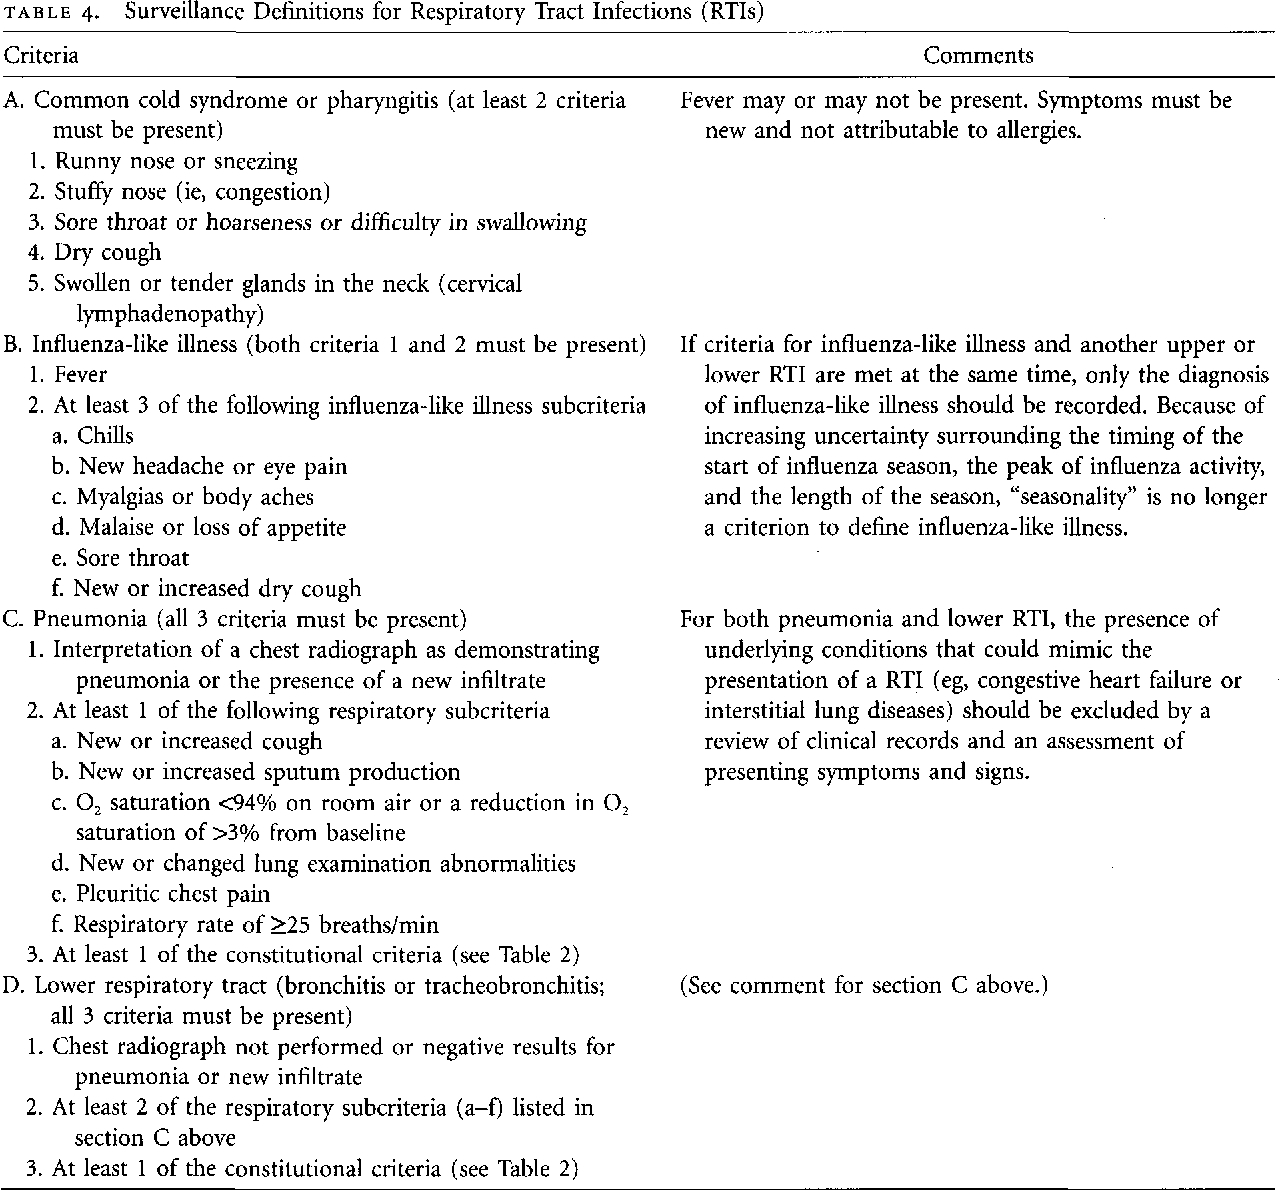 Table 4 From Surveillance Definitions Of Infections In Long